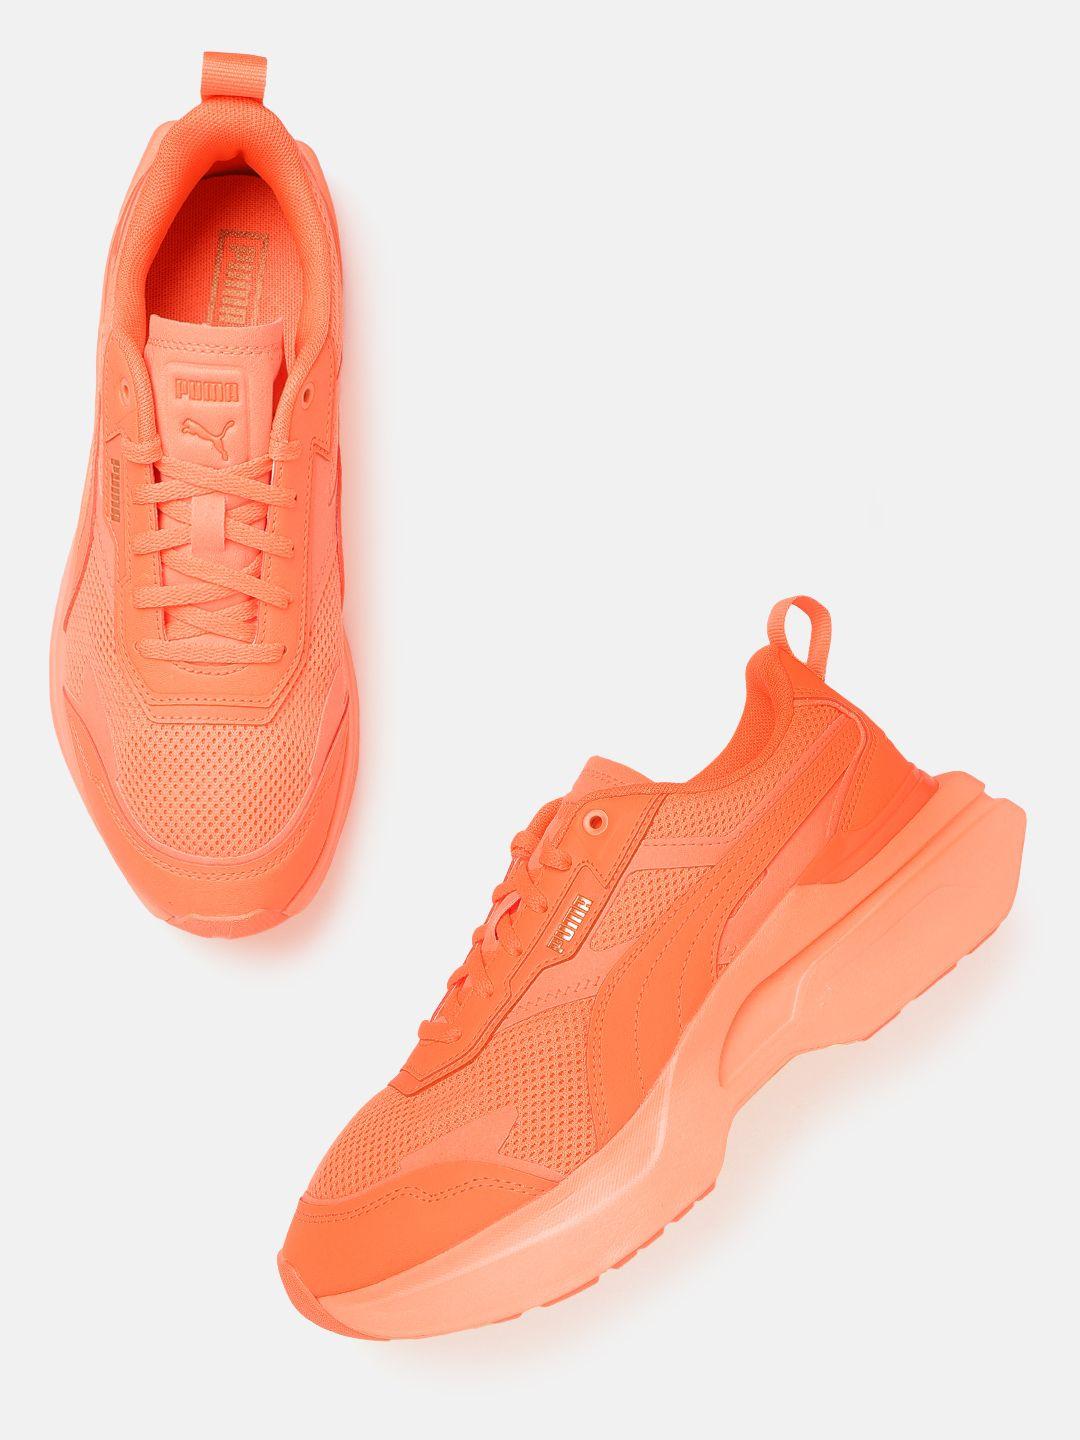 puma women orange woven design leather sneakers excluding trims